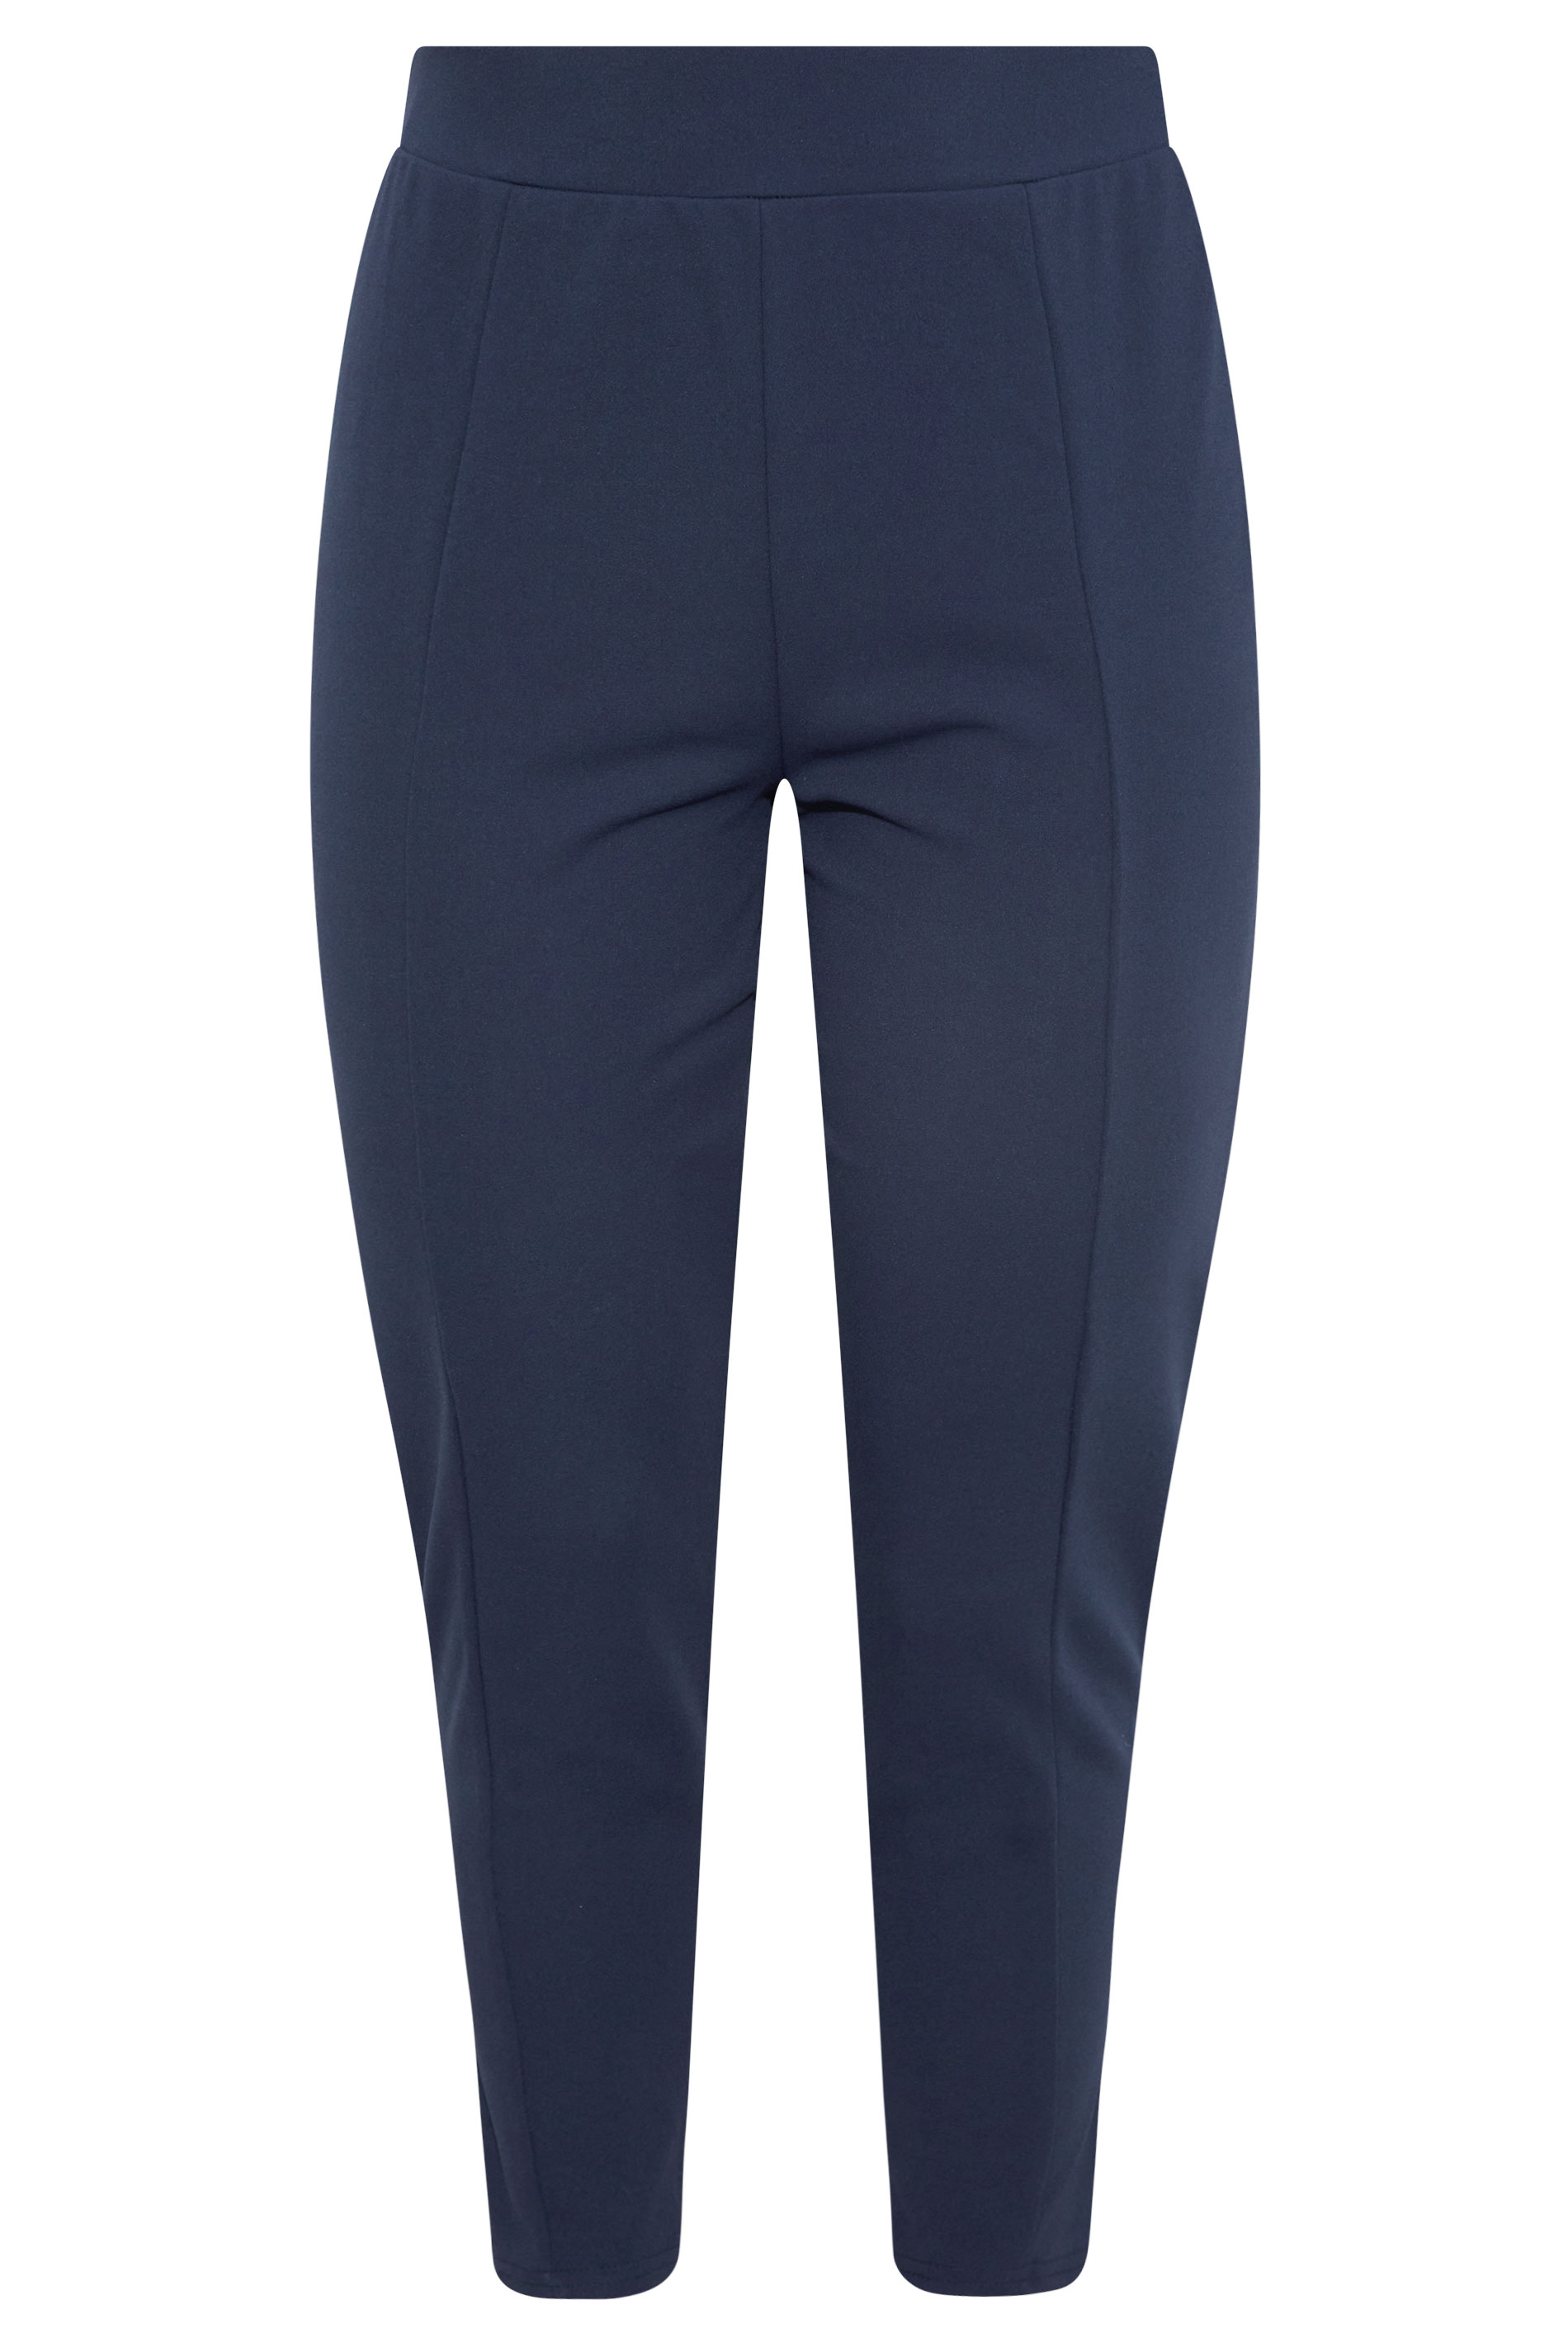 Buy MAX Checked Slim Tapered Trousers from Max at just INR 10490